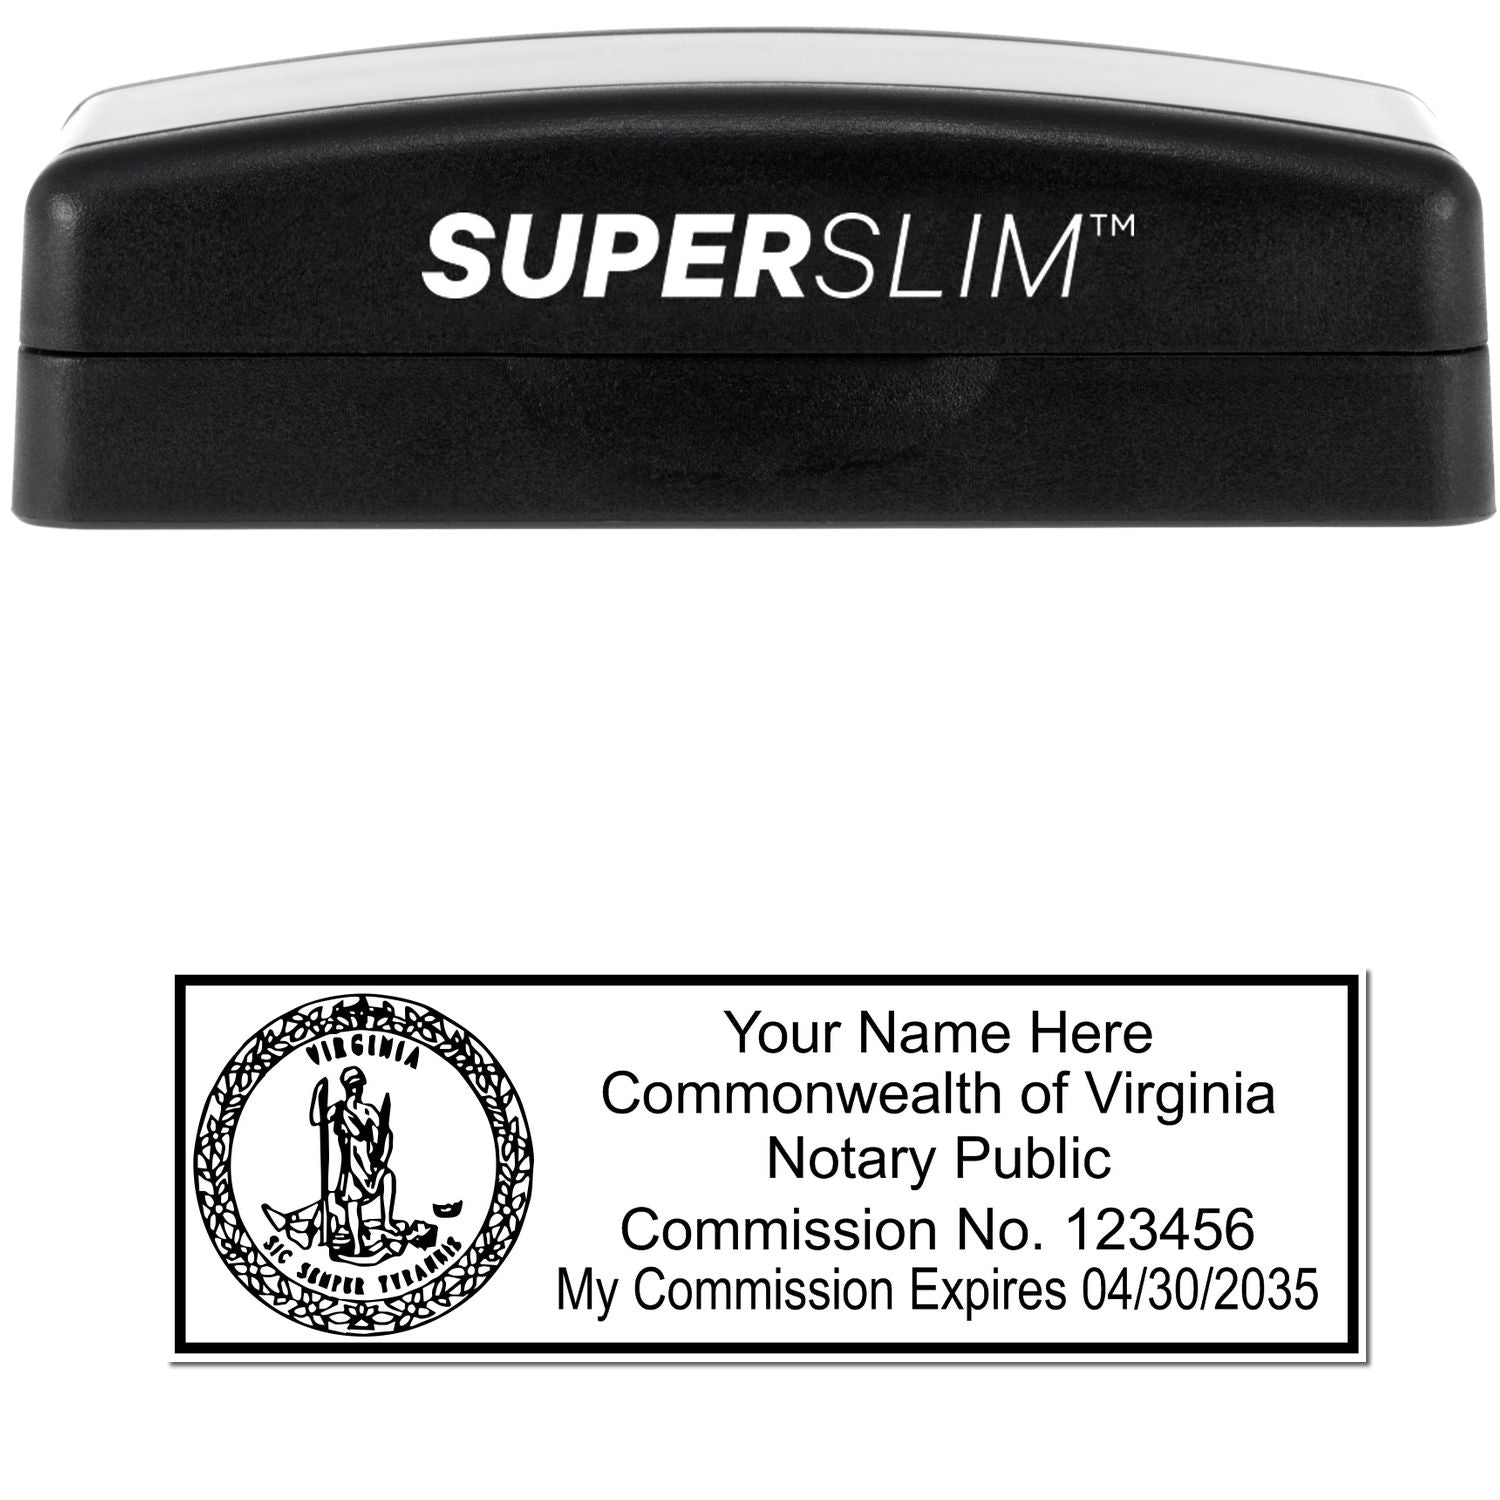 The main image for the Super Slim Virginia Notary Public Stamp depicting a sample of the imprint and electronic files